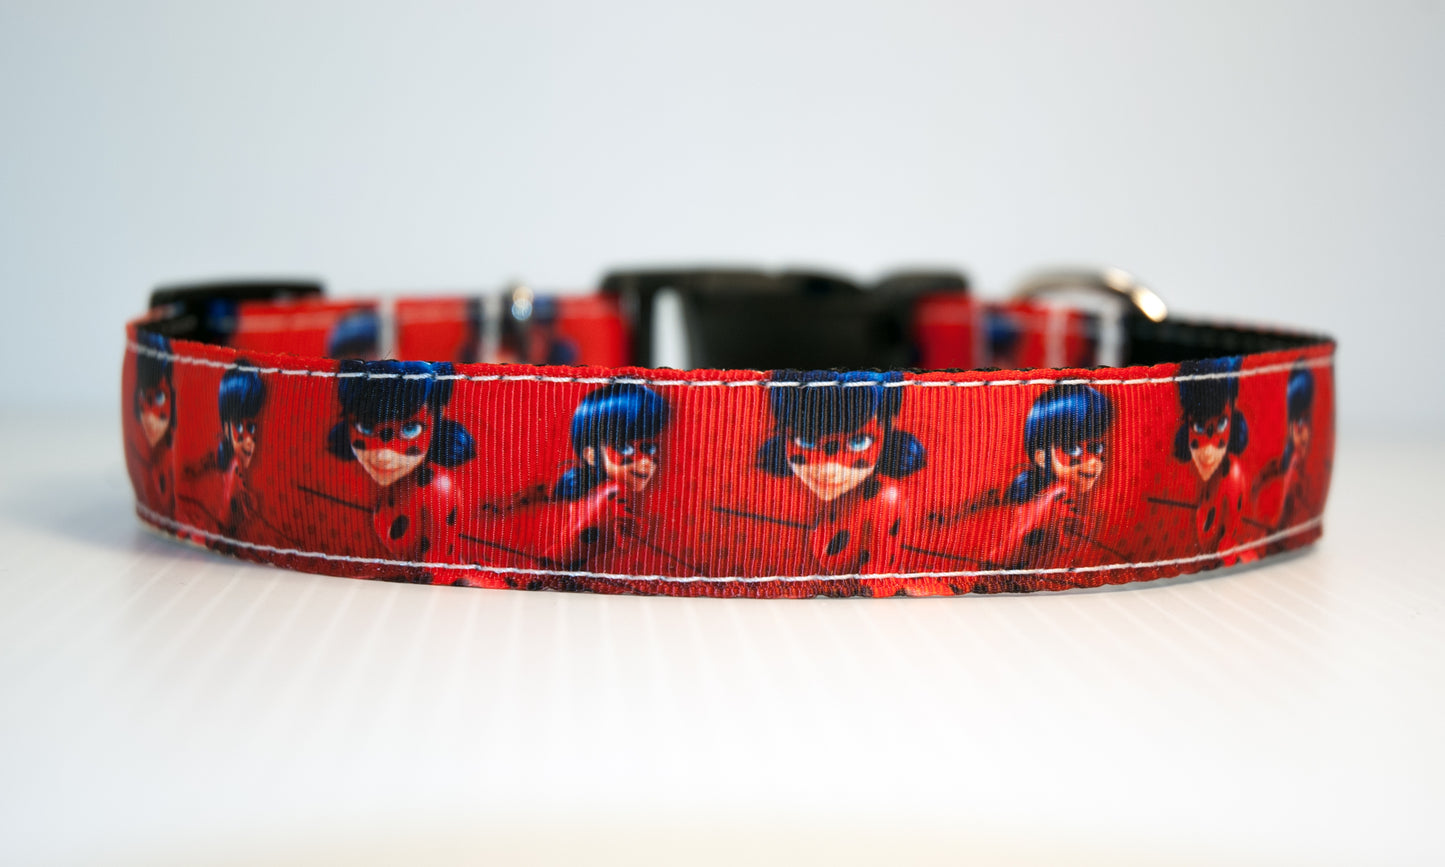 Ladybug Miraculous dog collar and/or leash. 1 inch wide